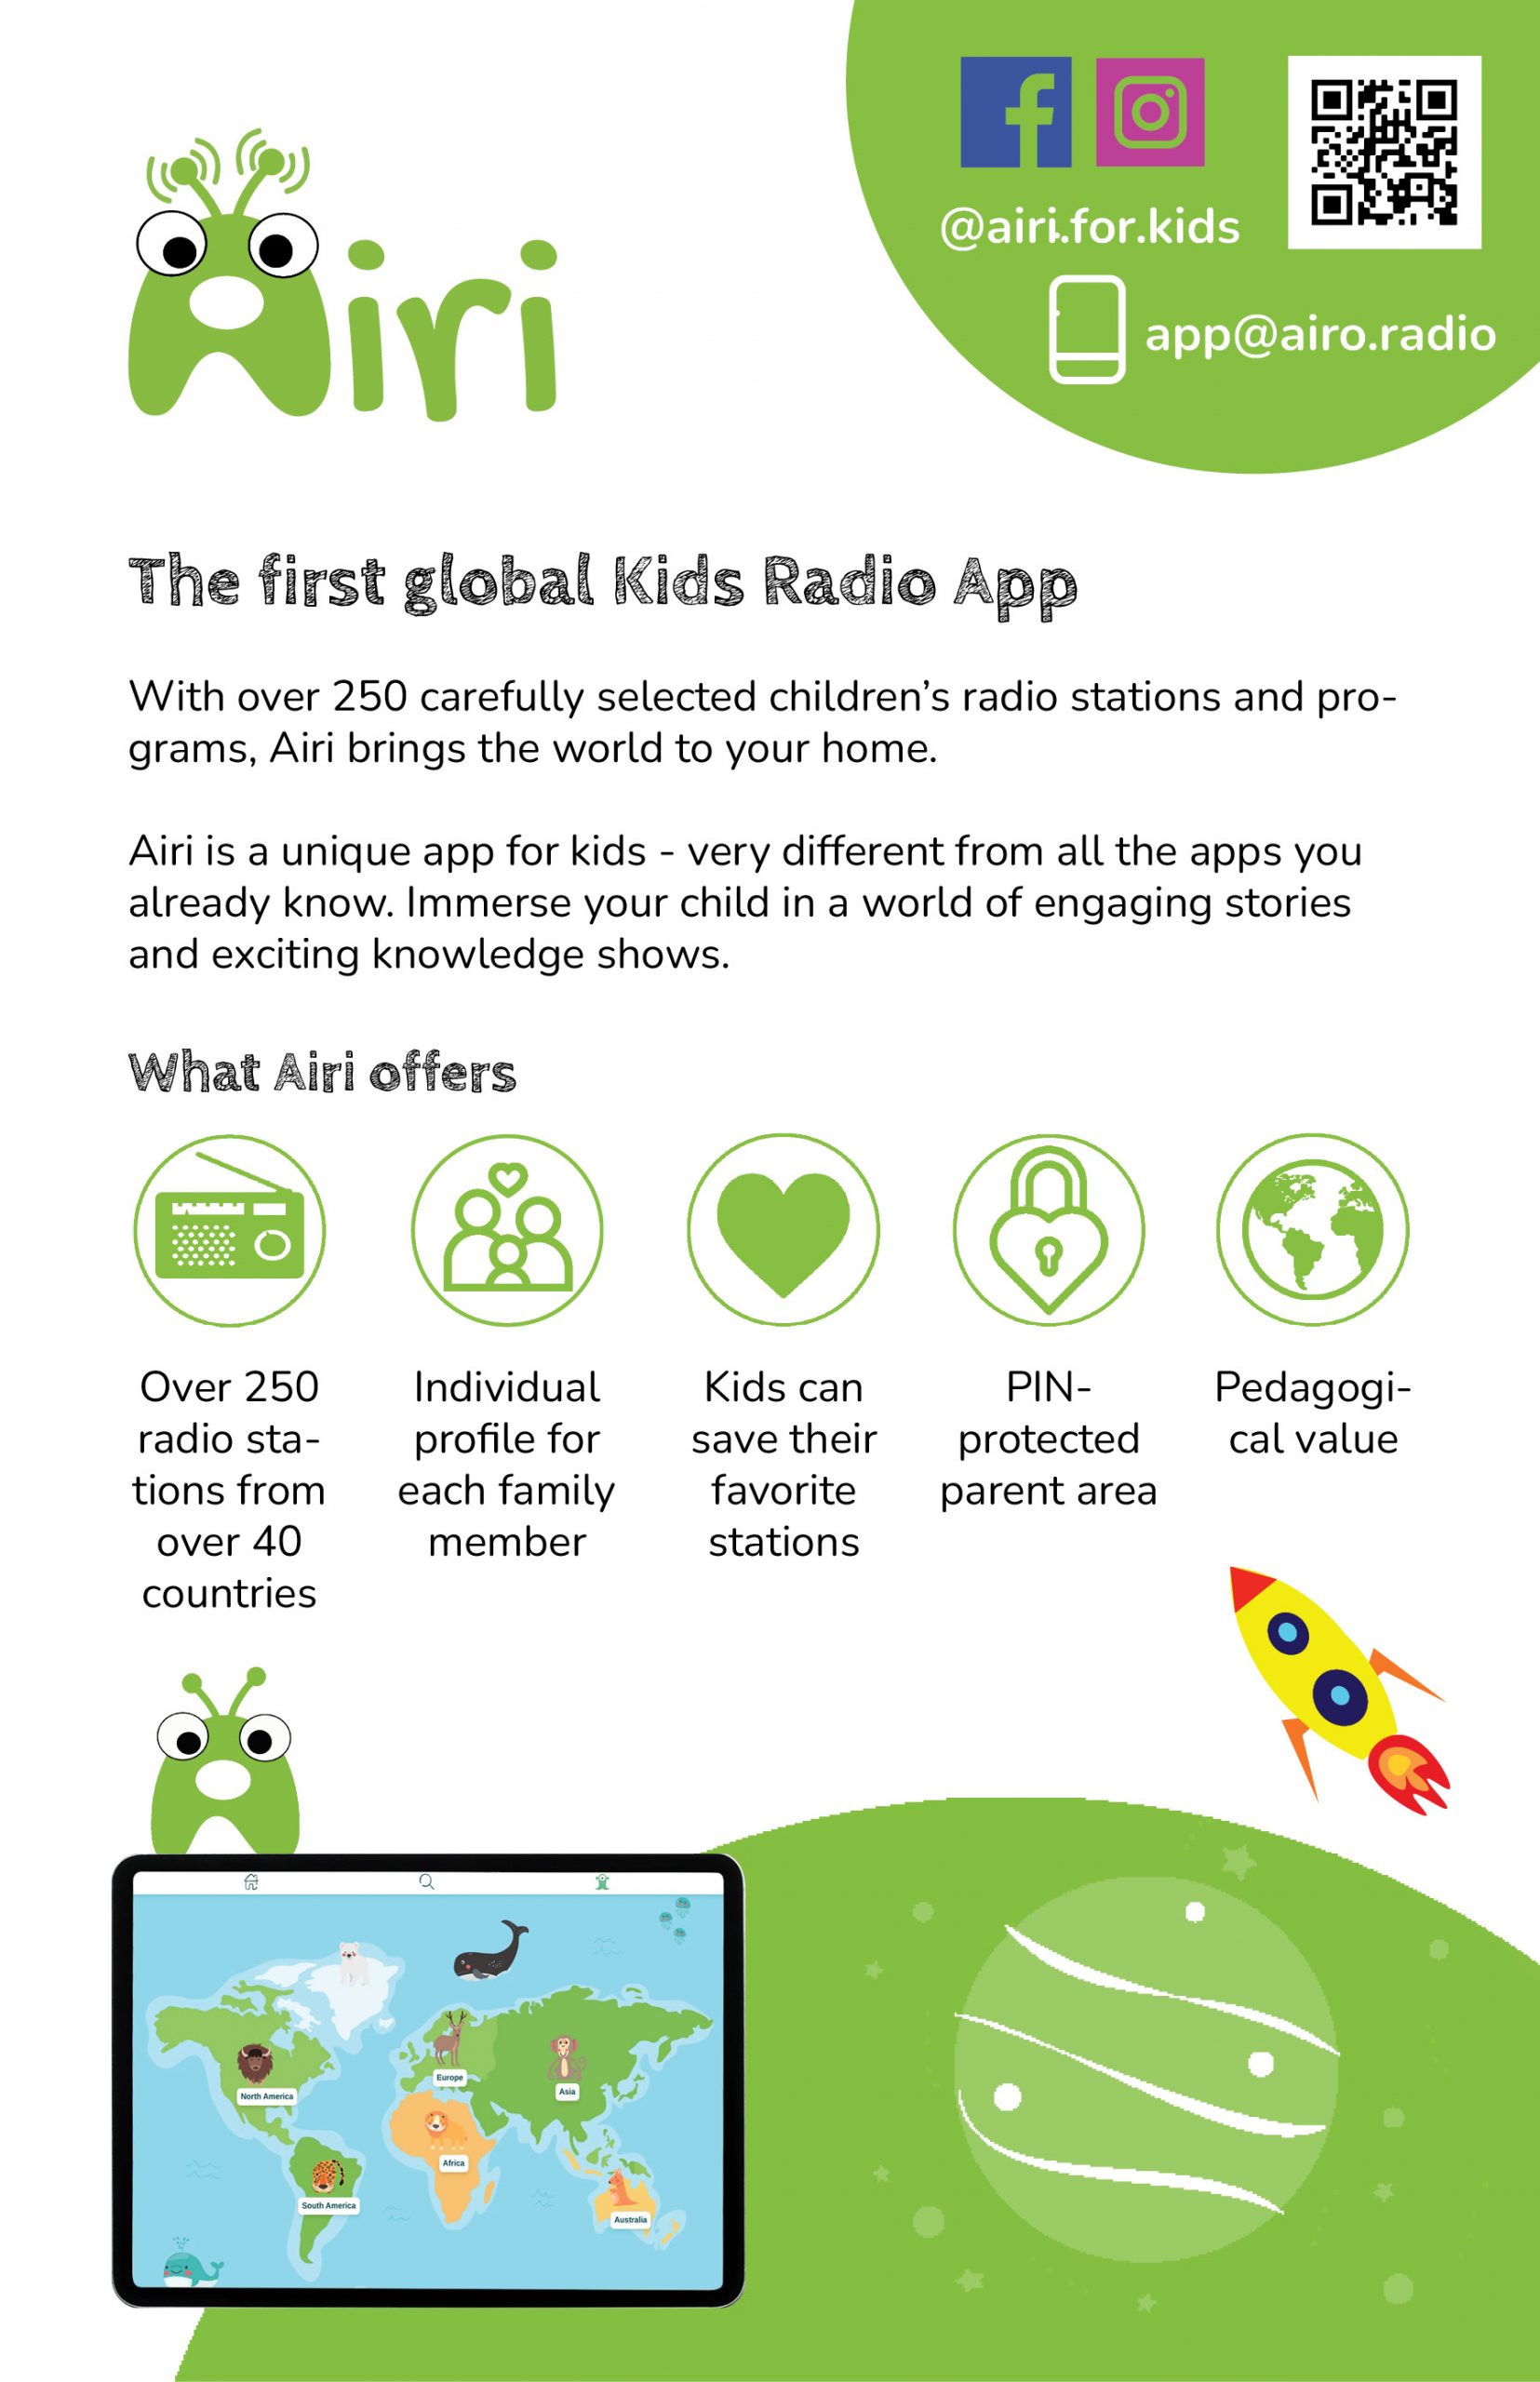 Advertisement for Airi, the first Kids Radio App